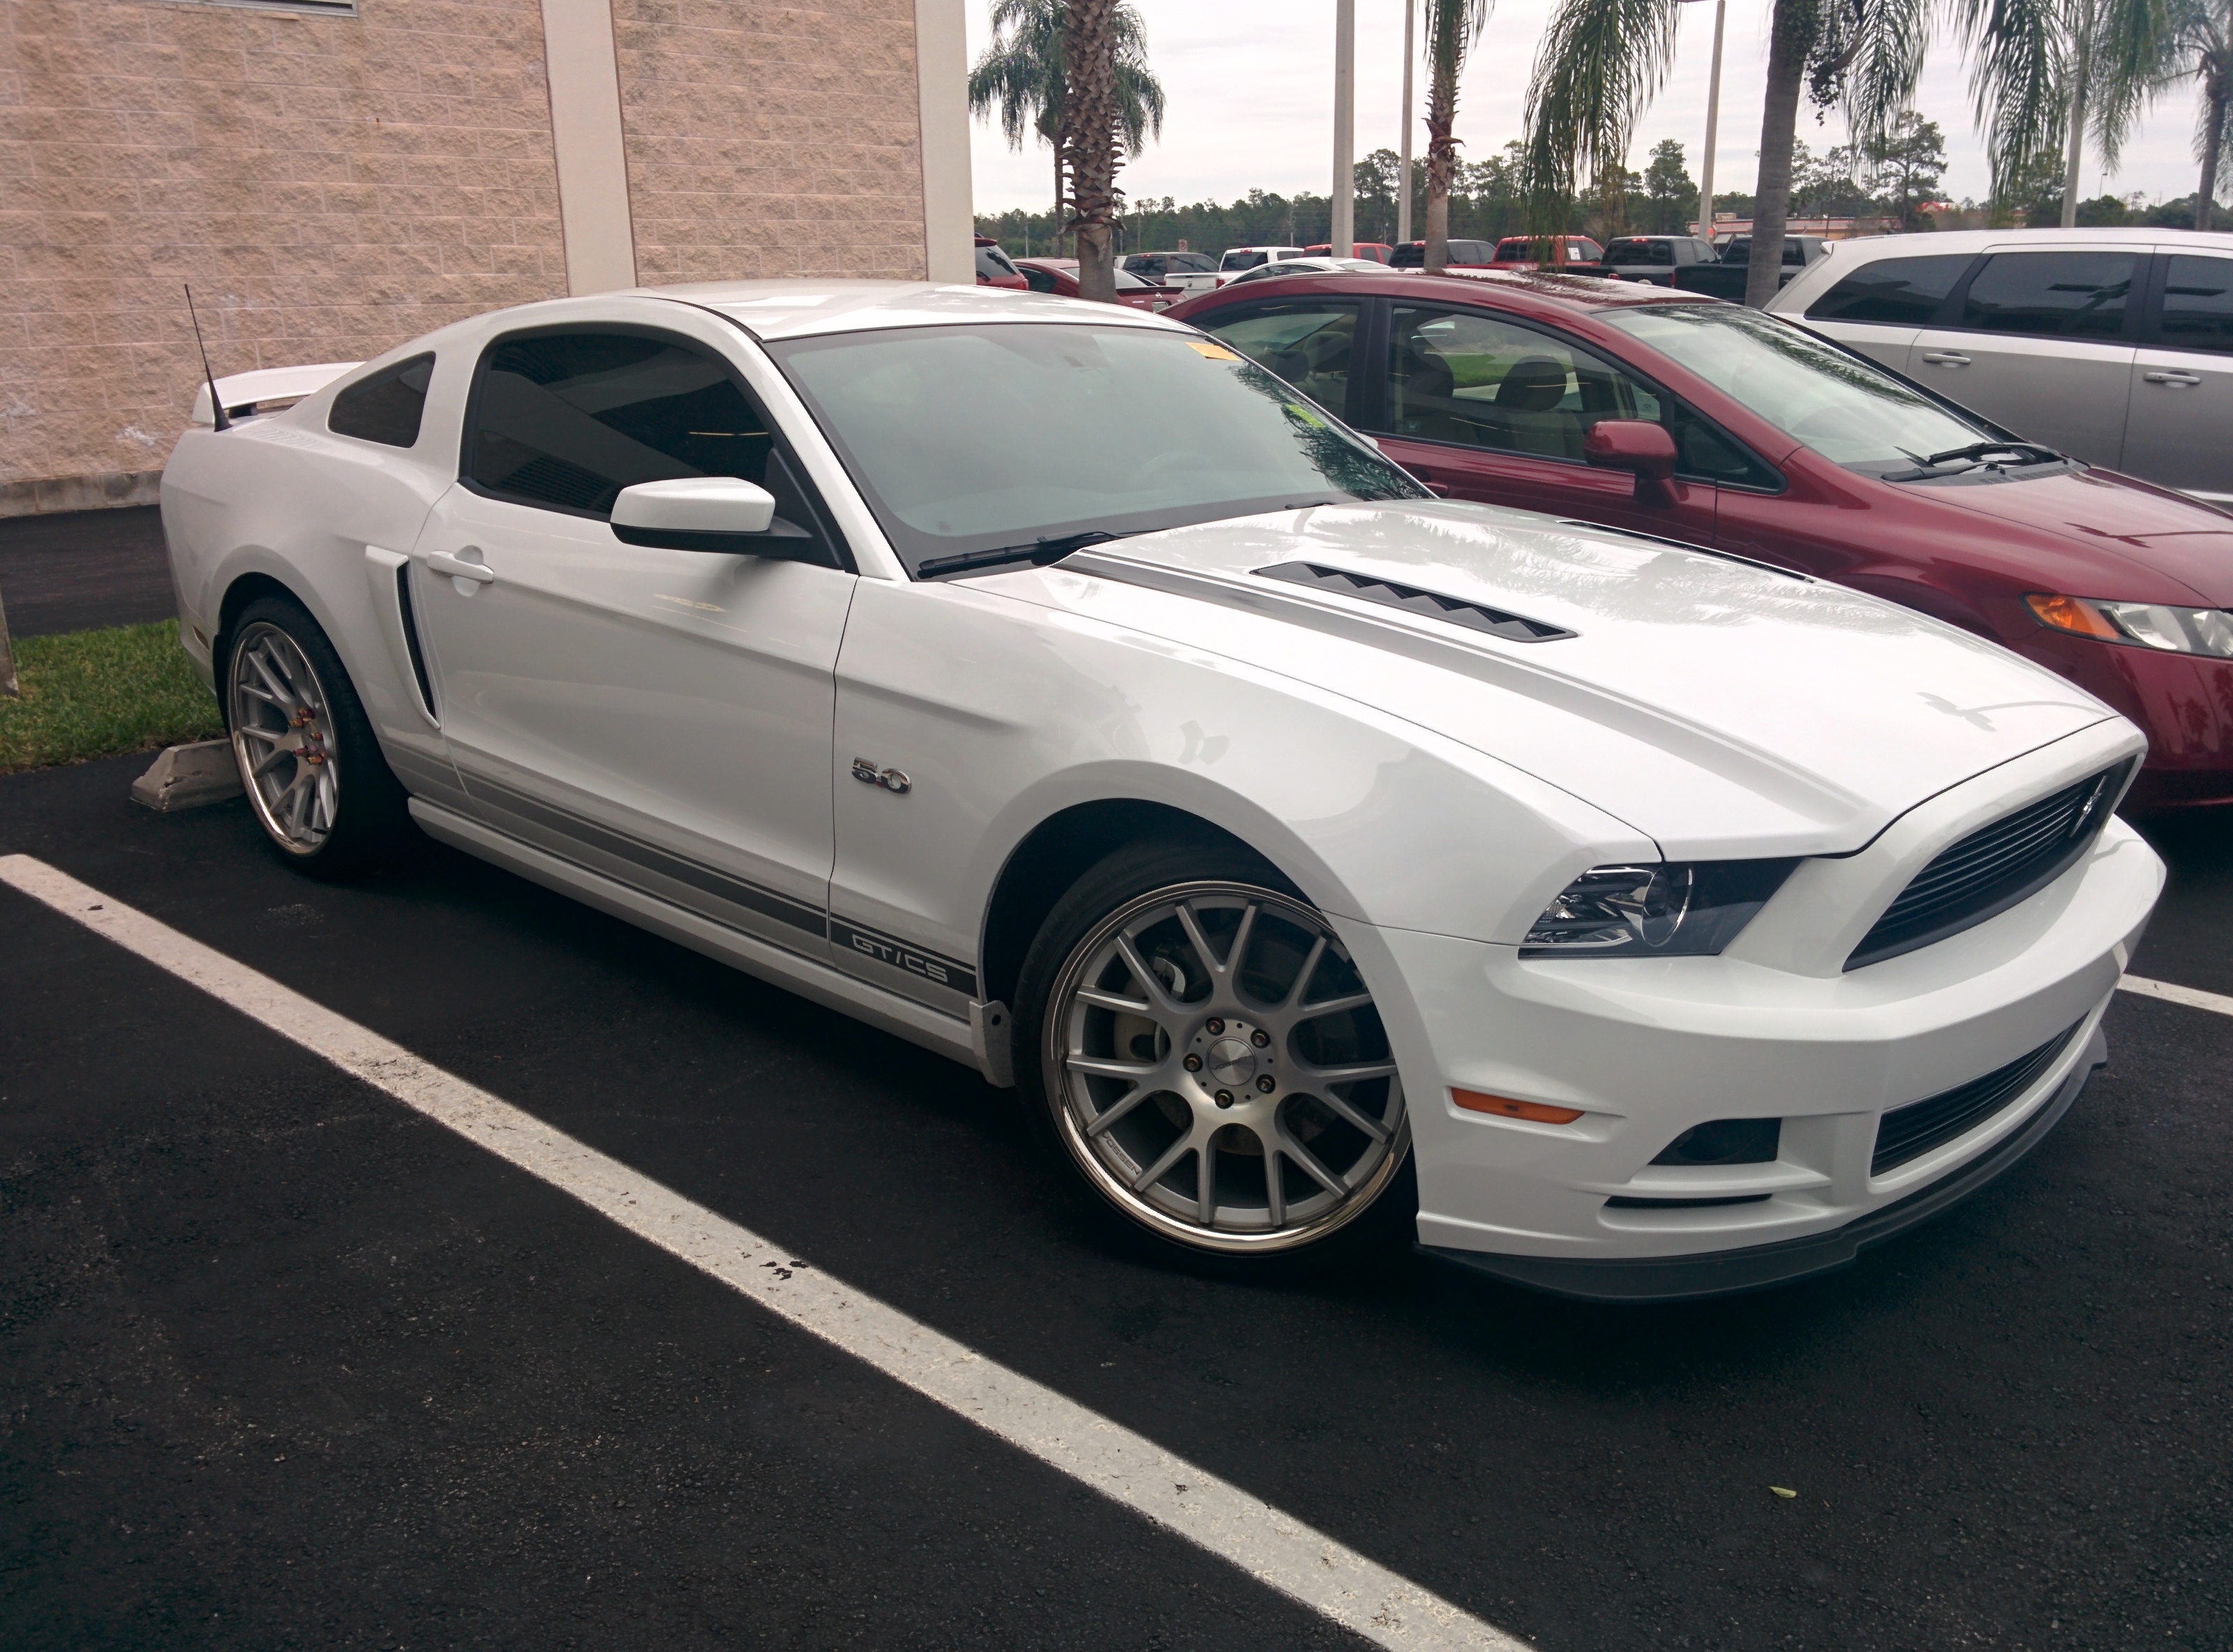 Mustang GT | Buy Ford Mustang GT Cars for Sale | eBay